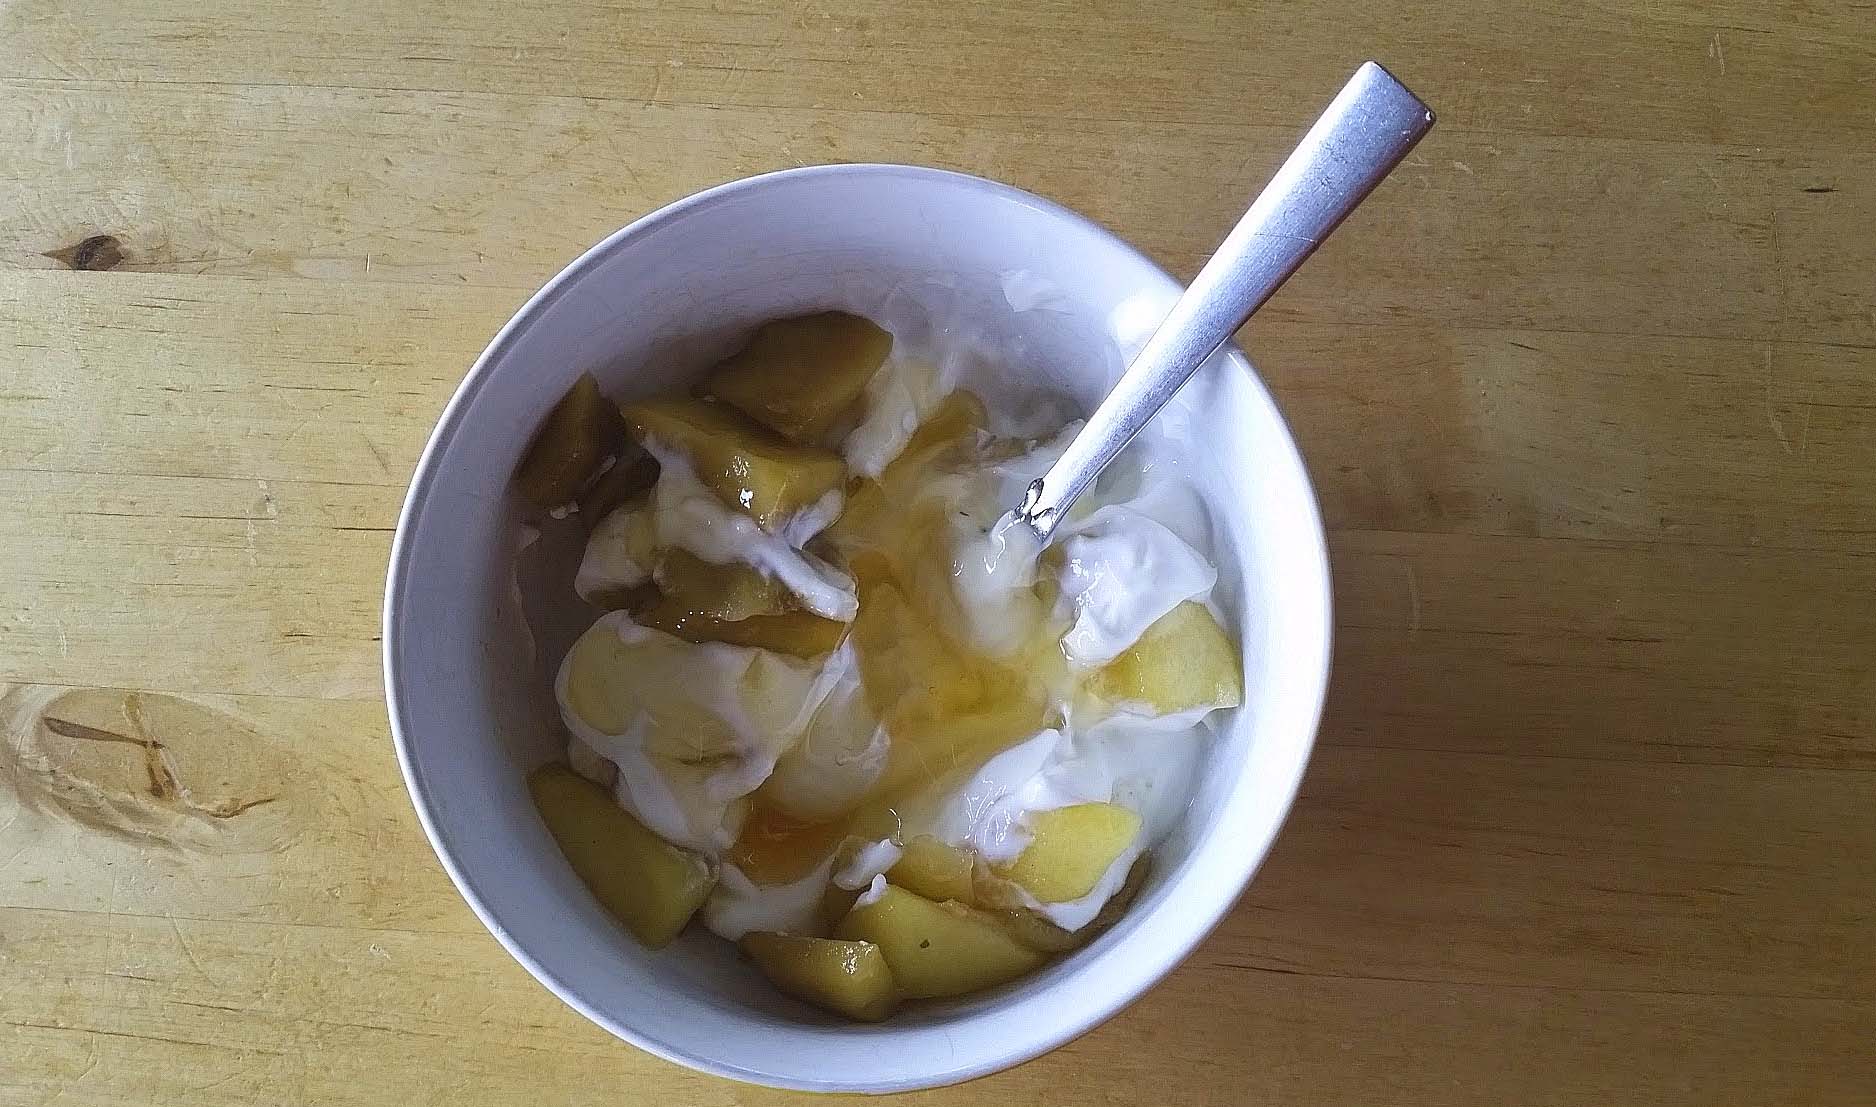 Greek yogurt + mango and apple fruit compote = healthy after workout snack